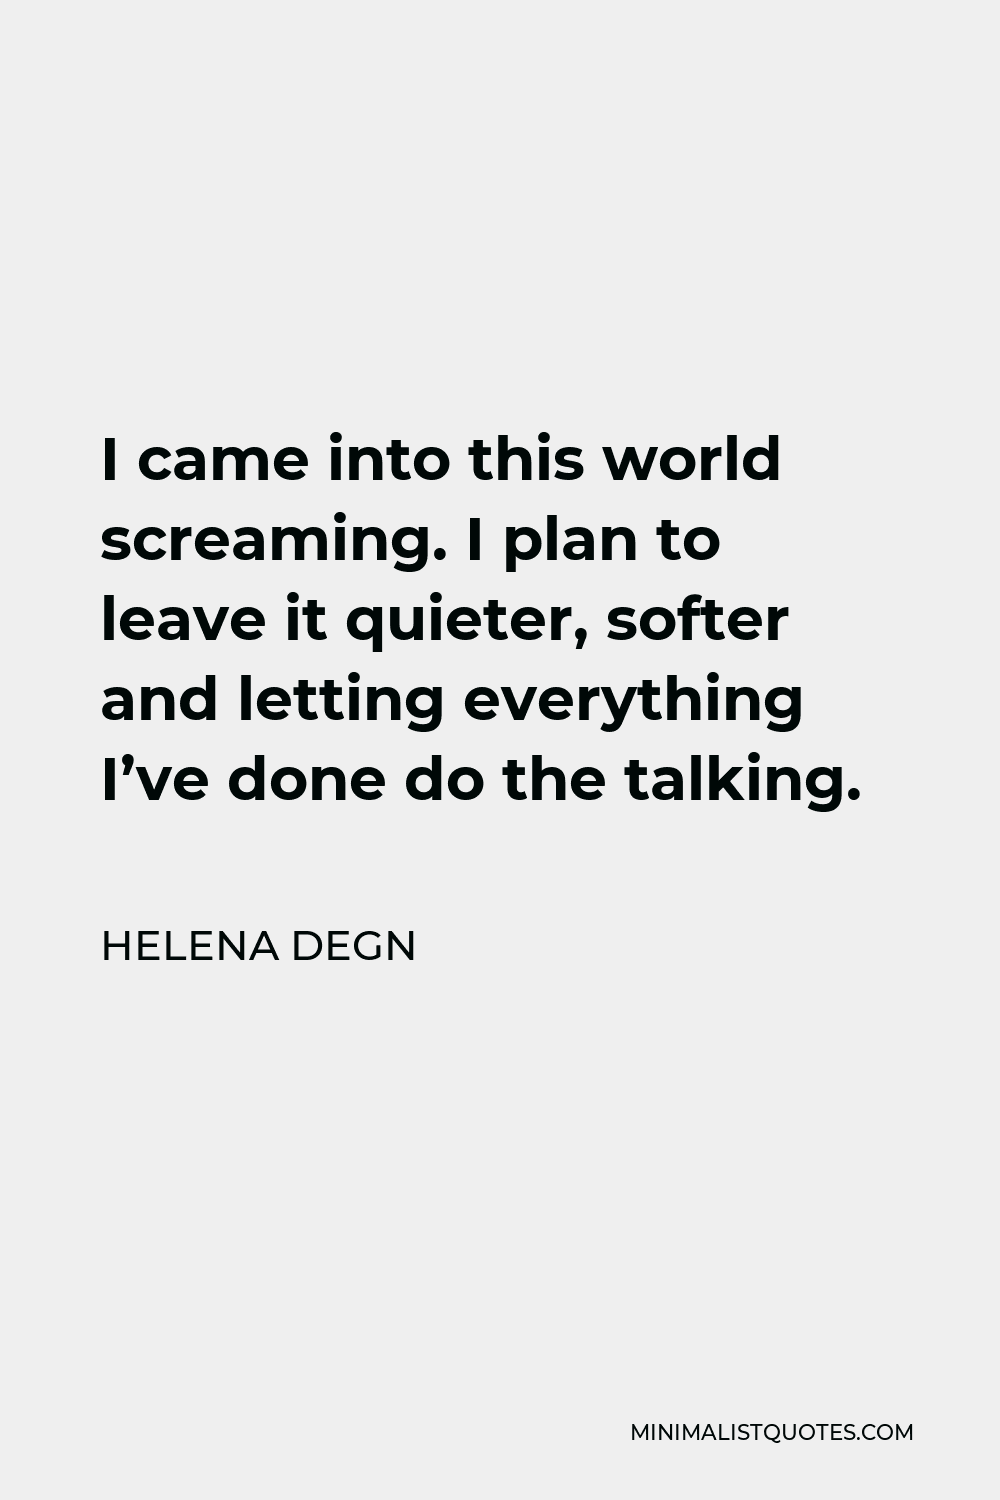 Helena Degn Quote - I came into this world screaming. I plan to leave it quieter, softer and letting everything I’ve done do the talking.